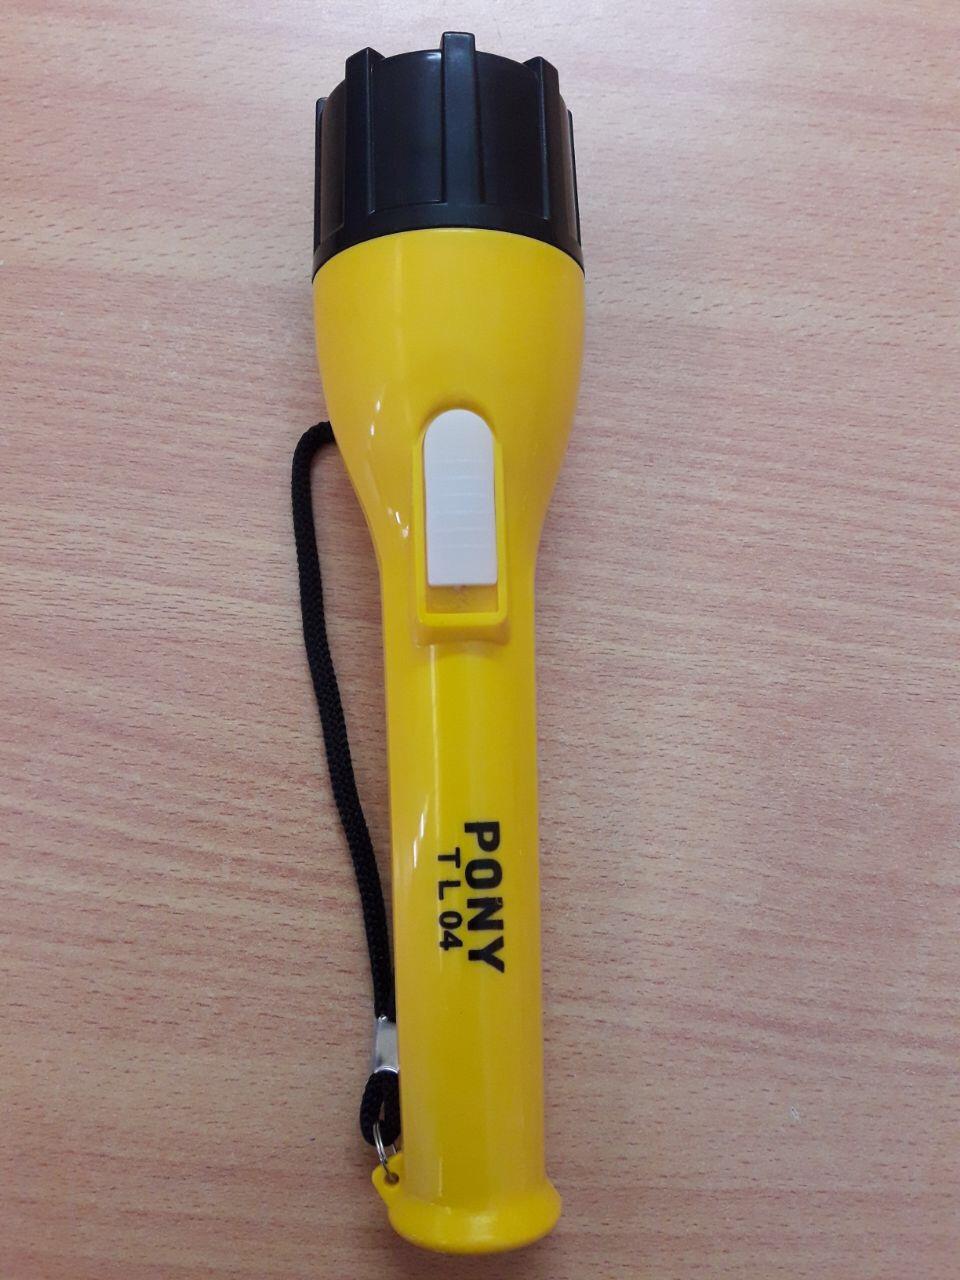 Flashlight TL-04 Features 3 Cell Flashlight 3 Battery Free along with